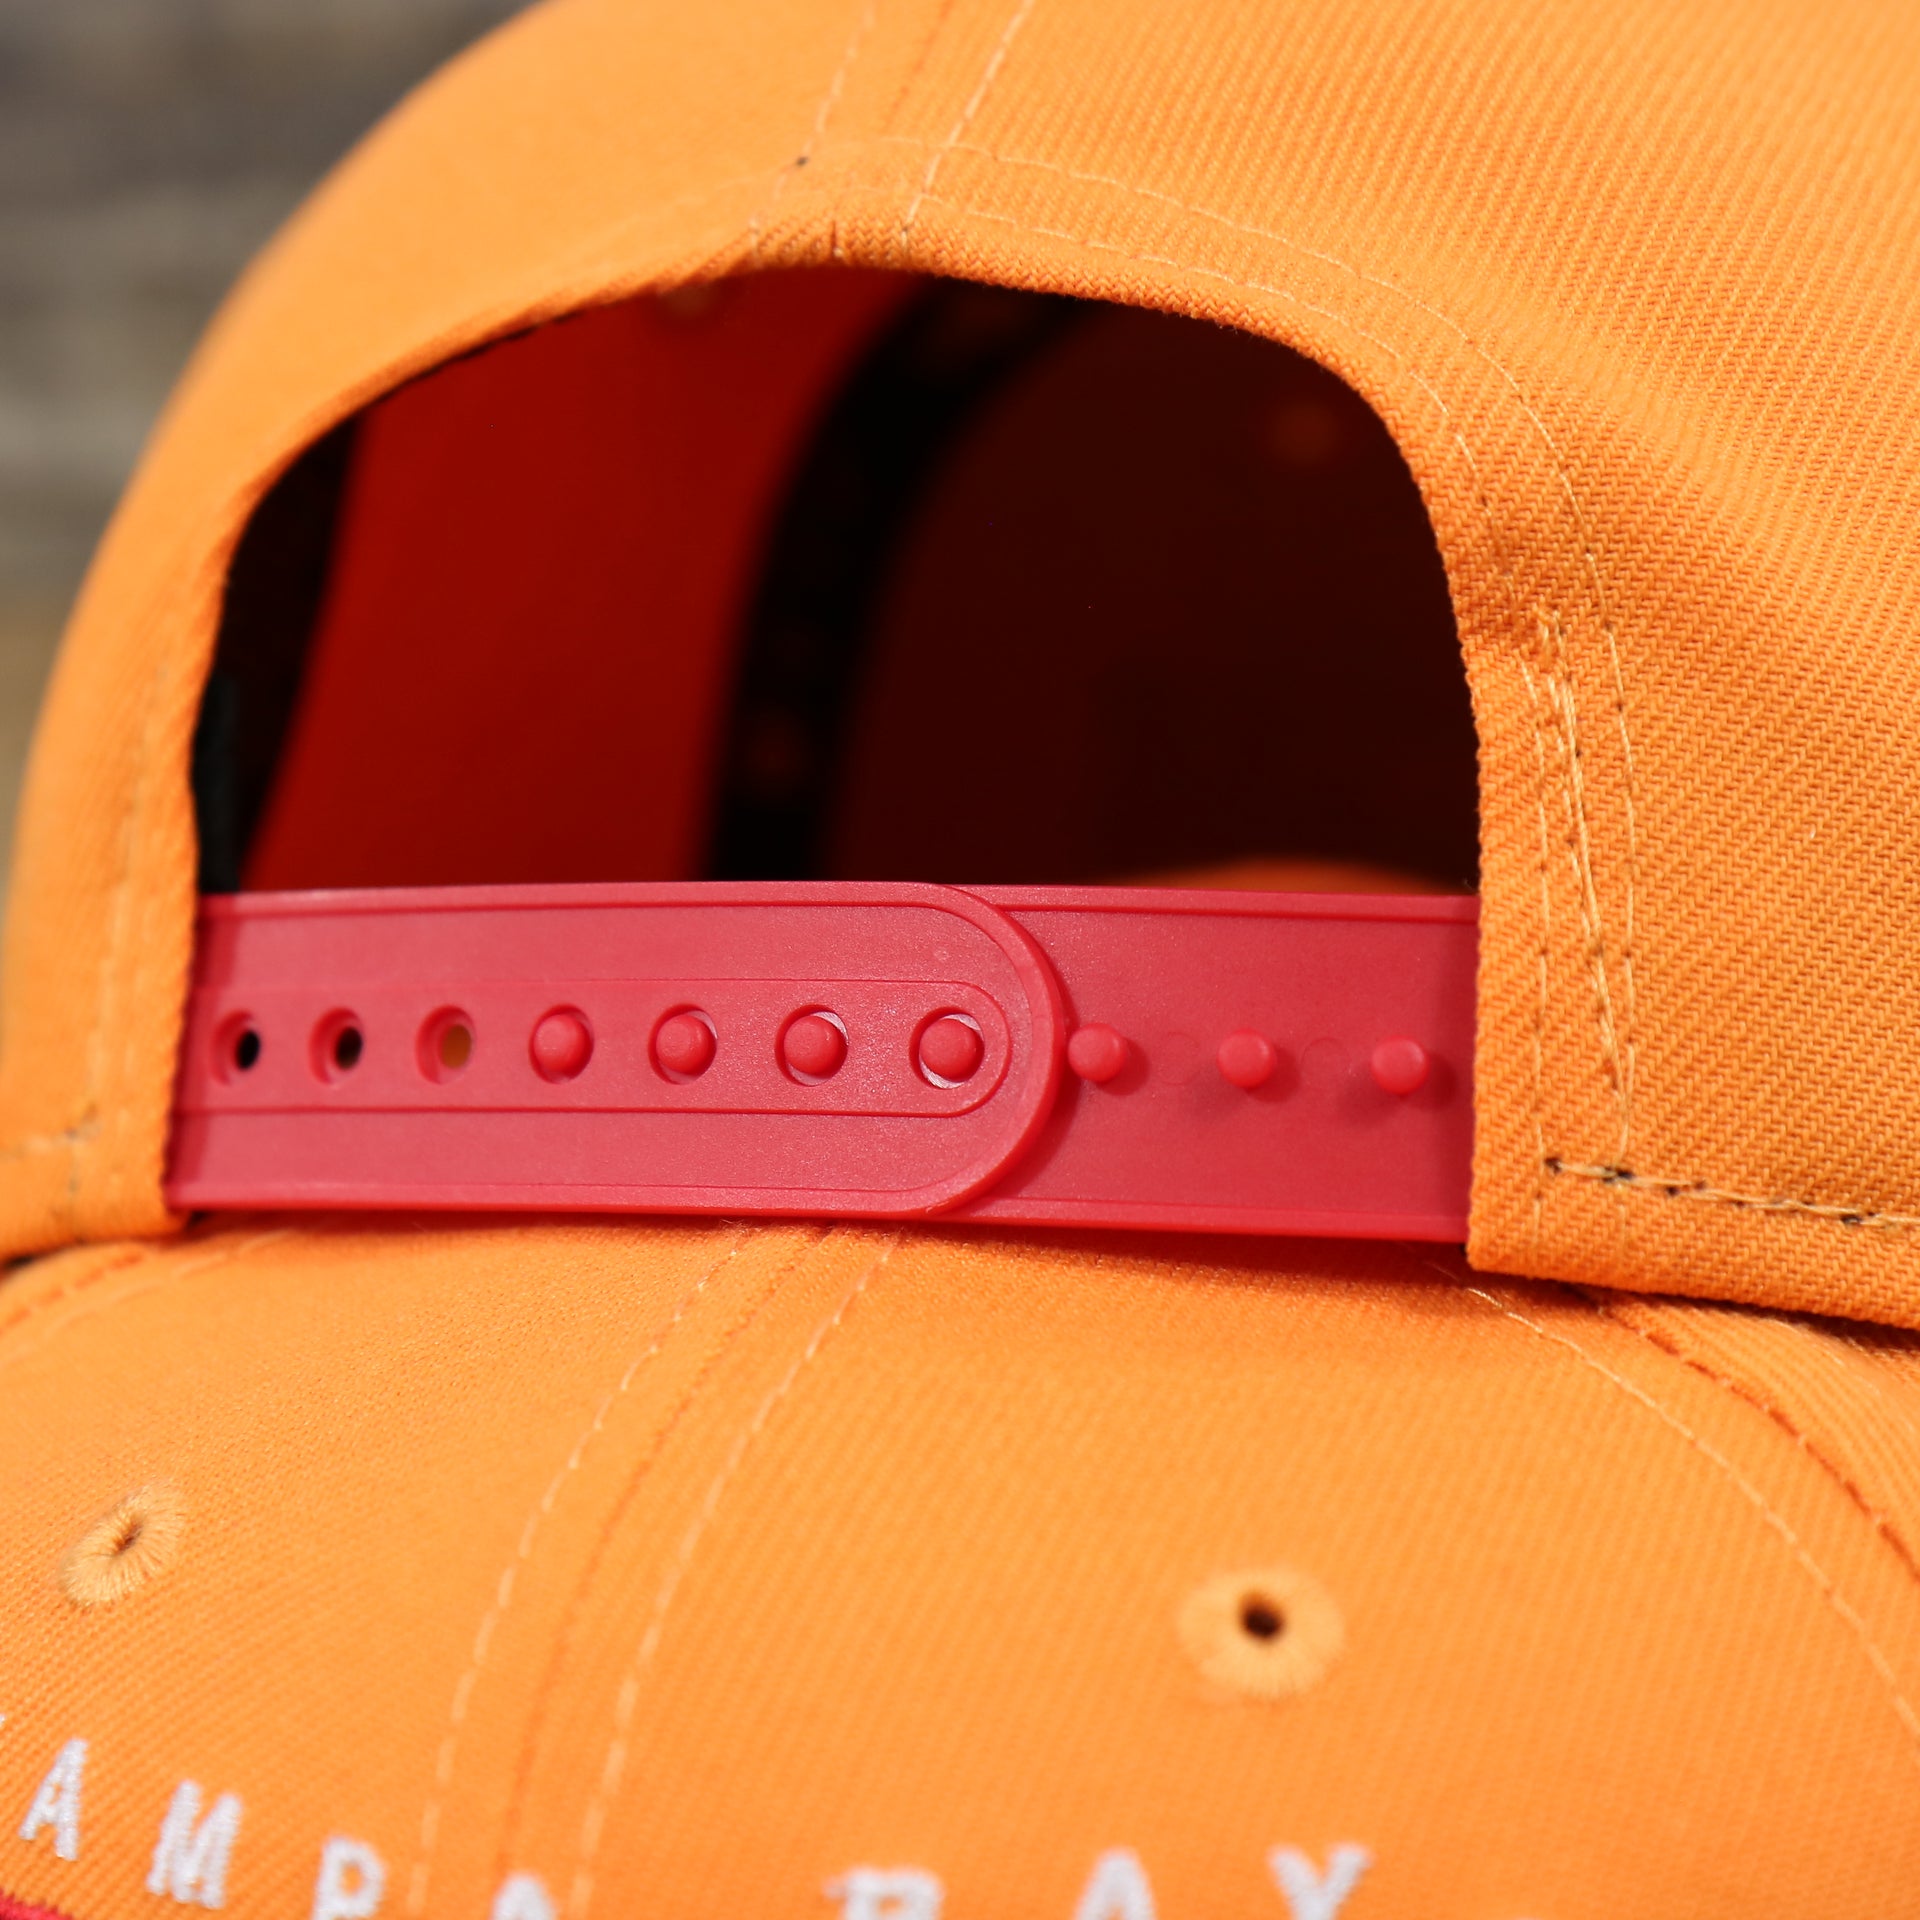 The Red Adjustable Strap on the Tampa Bay Buccaneers Team Script Gray Bottom 9Fifty Snapback | Orange And Red Snap Cap